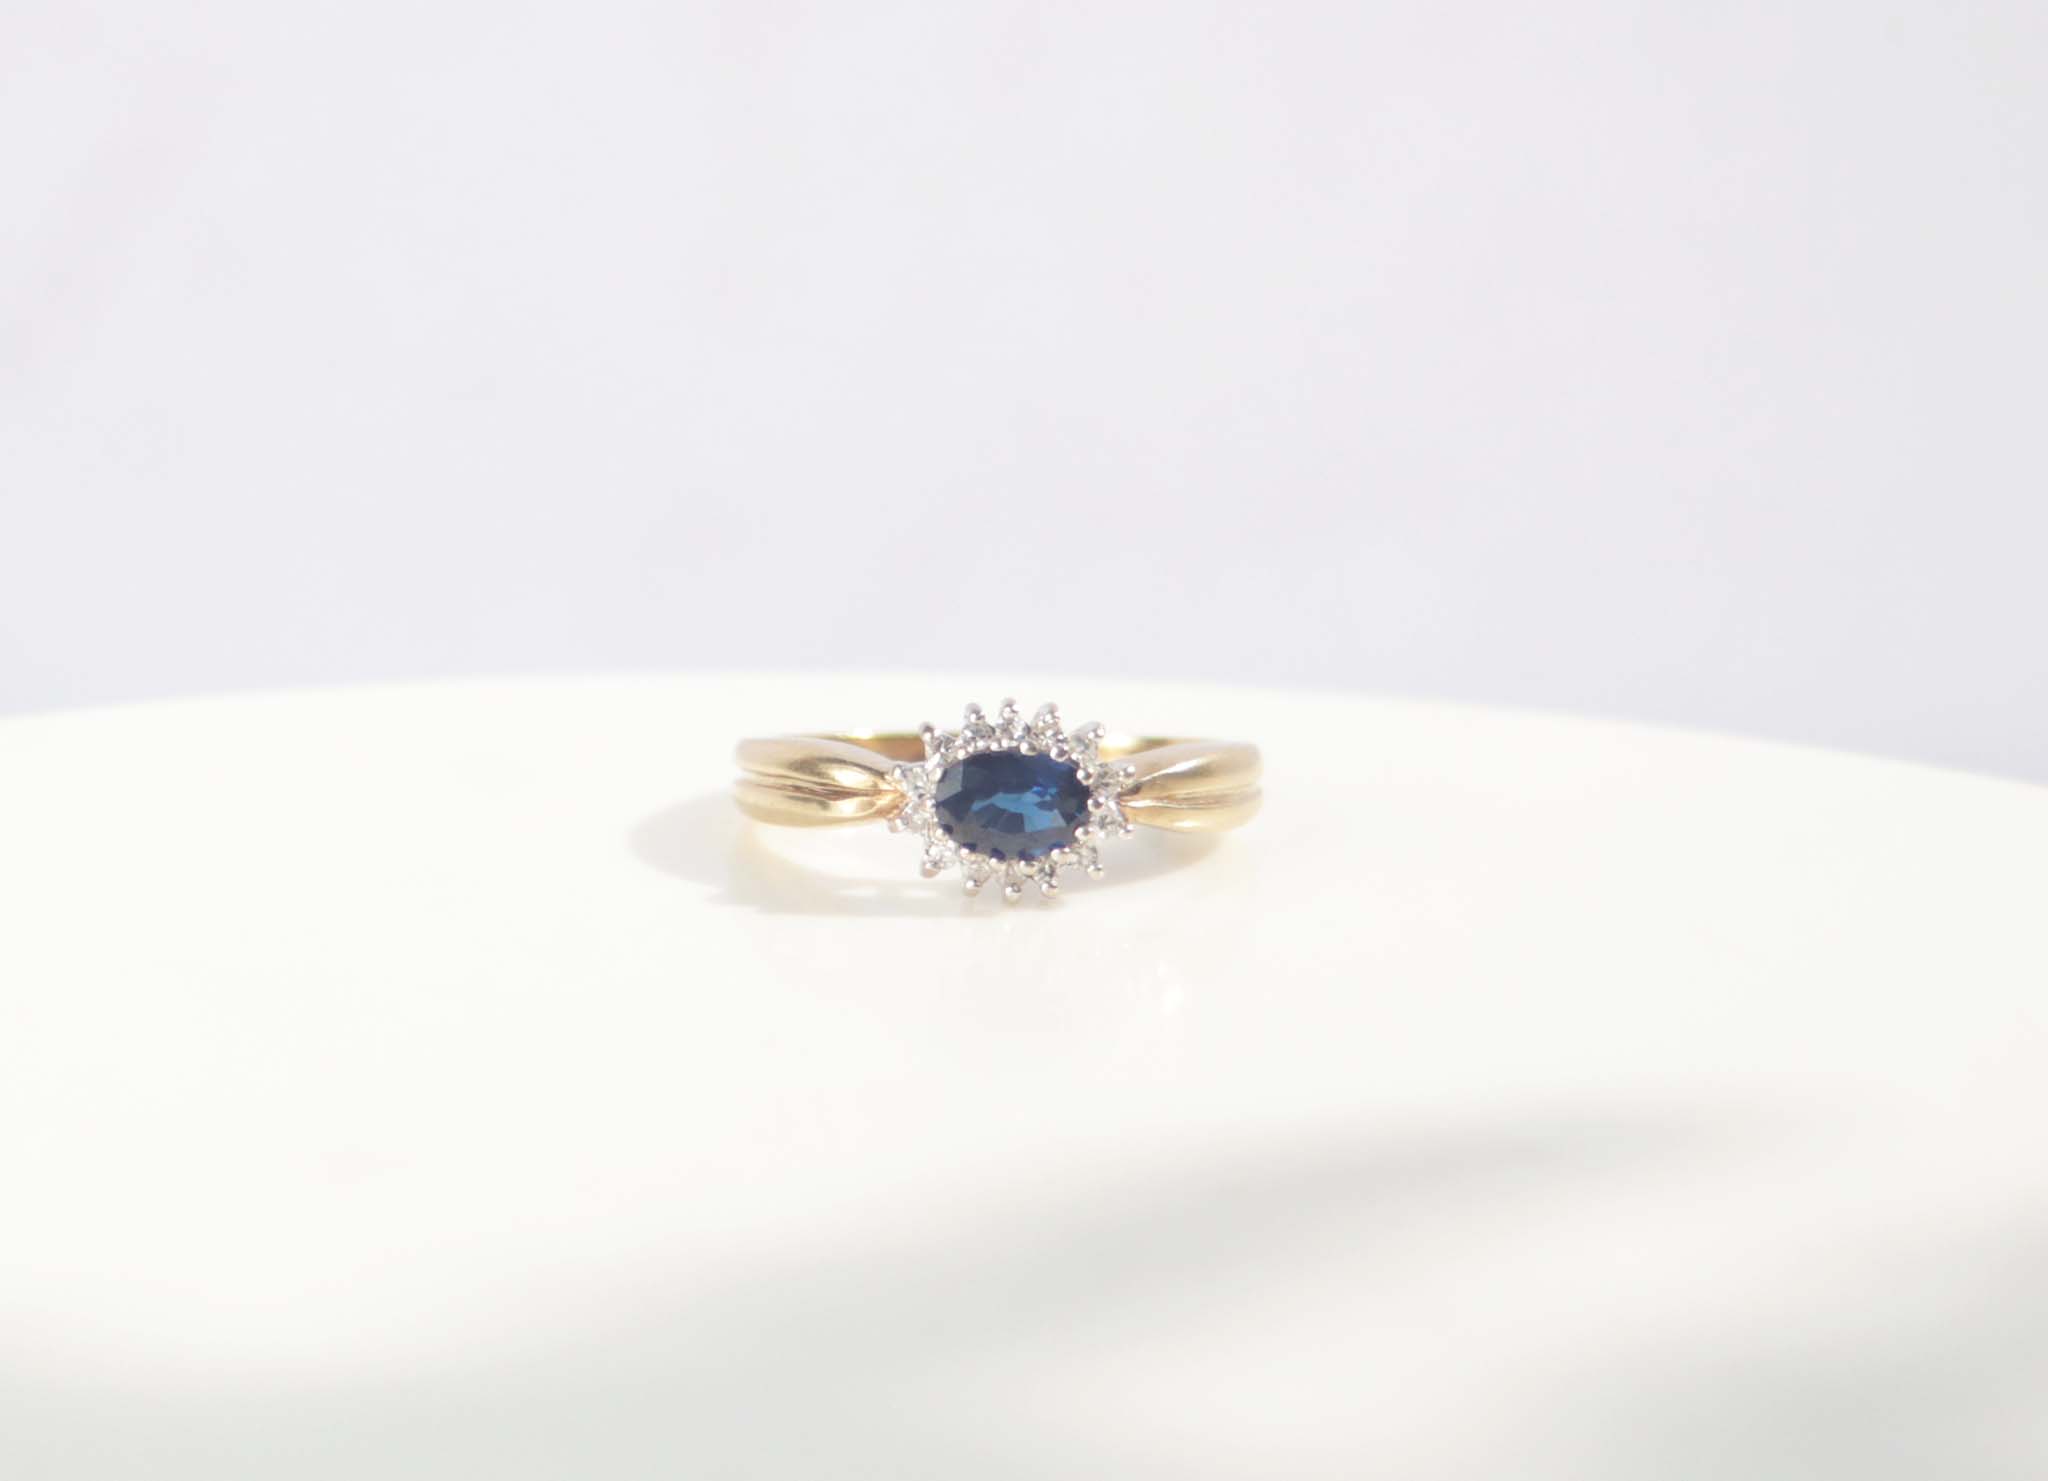 A classic Edwardian inspired sapphire and diamond ring. Crafted from 9ct yellow gold, this classic design features a vivid blue sapphire surrounded by fourteen round brilliant cut diamonds. With a carat weight of 0.75ct, the rich blue sapphire takes centre stage among a cluster of round brilliant diamonds.